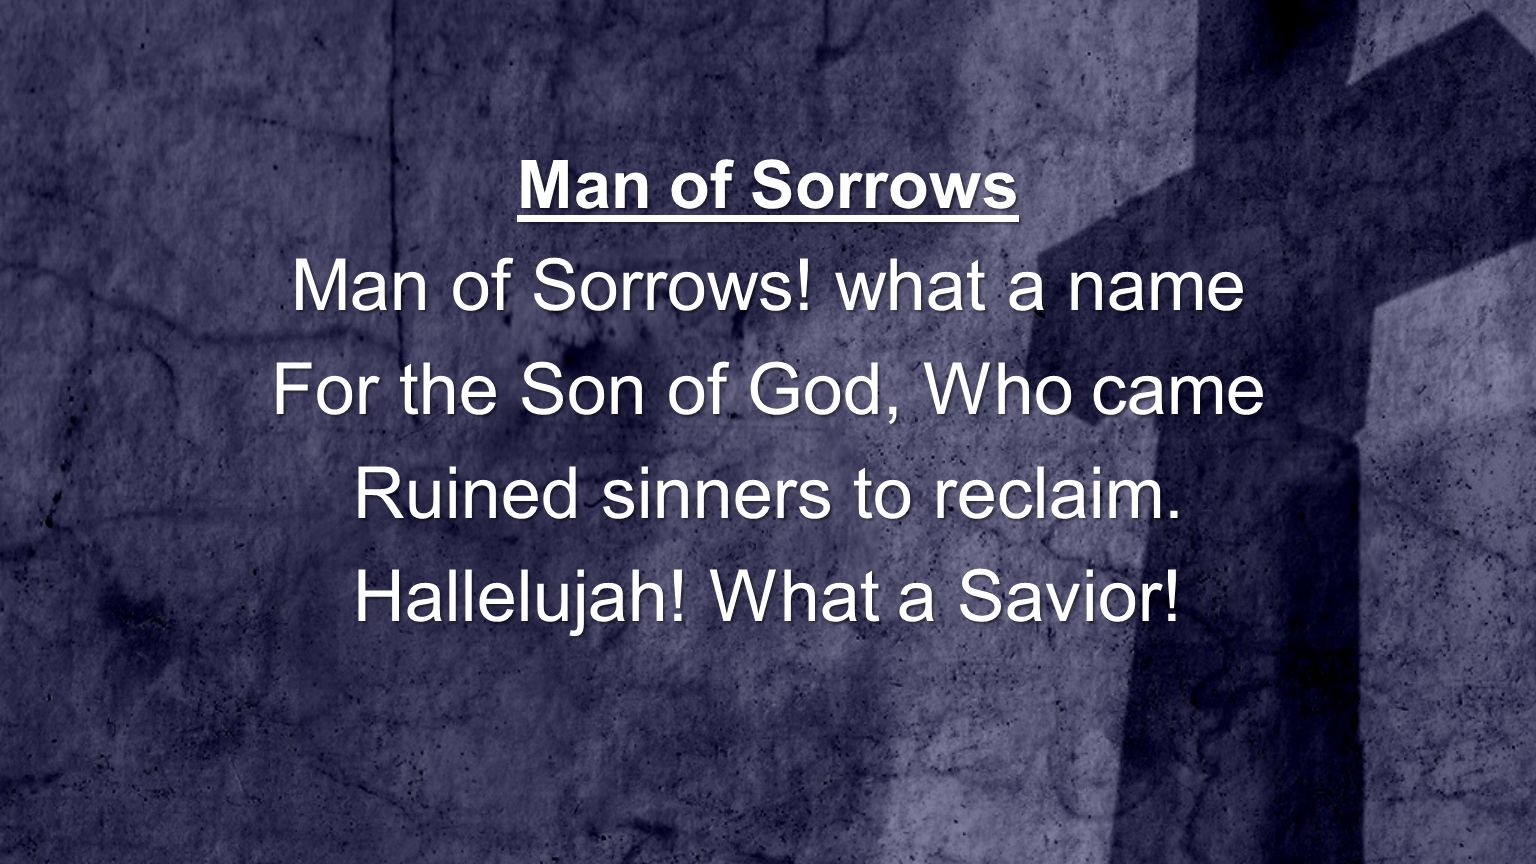 Man of Sorrows Man of Sorrows. what a name For the Son of God, Who came Ruined sinners to reclaim.